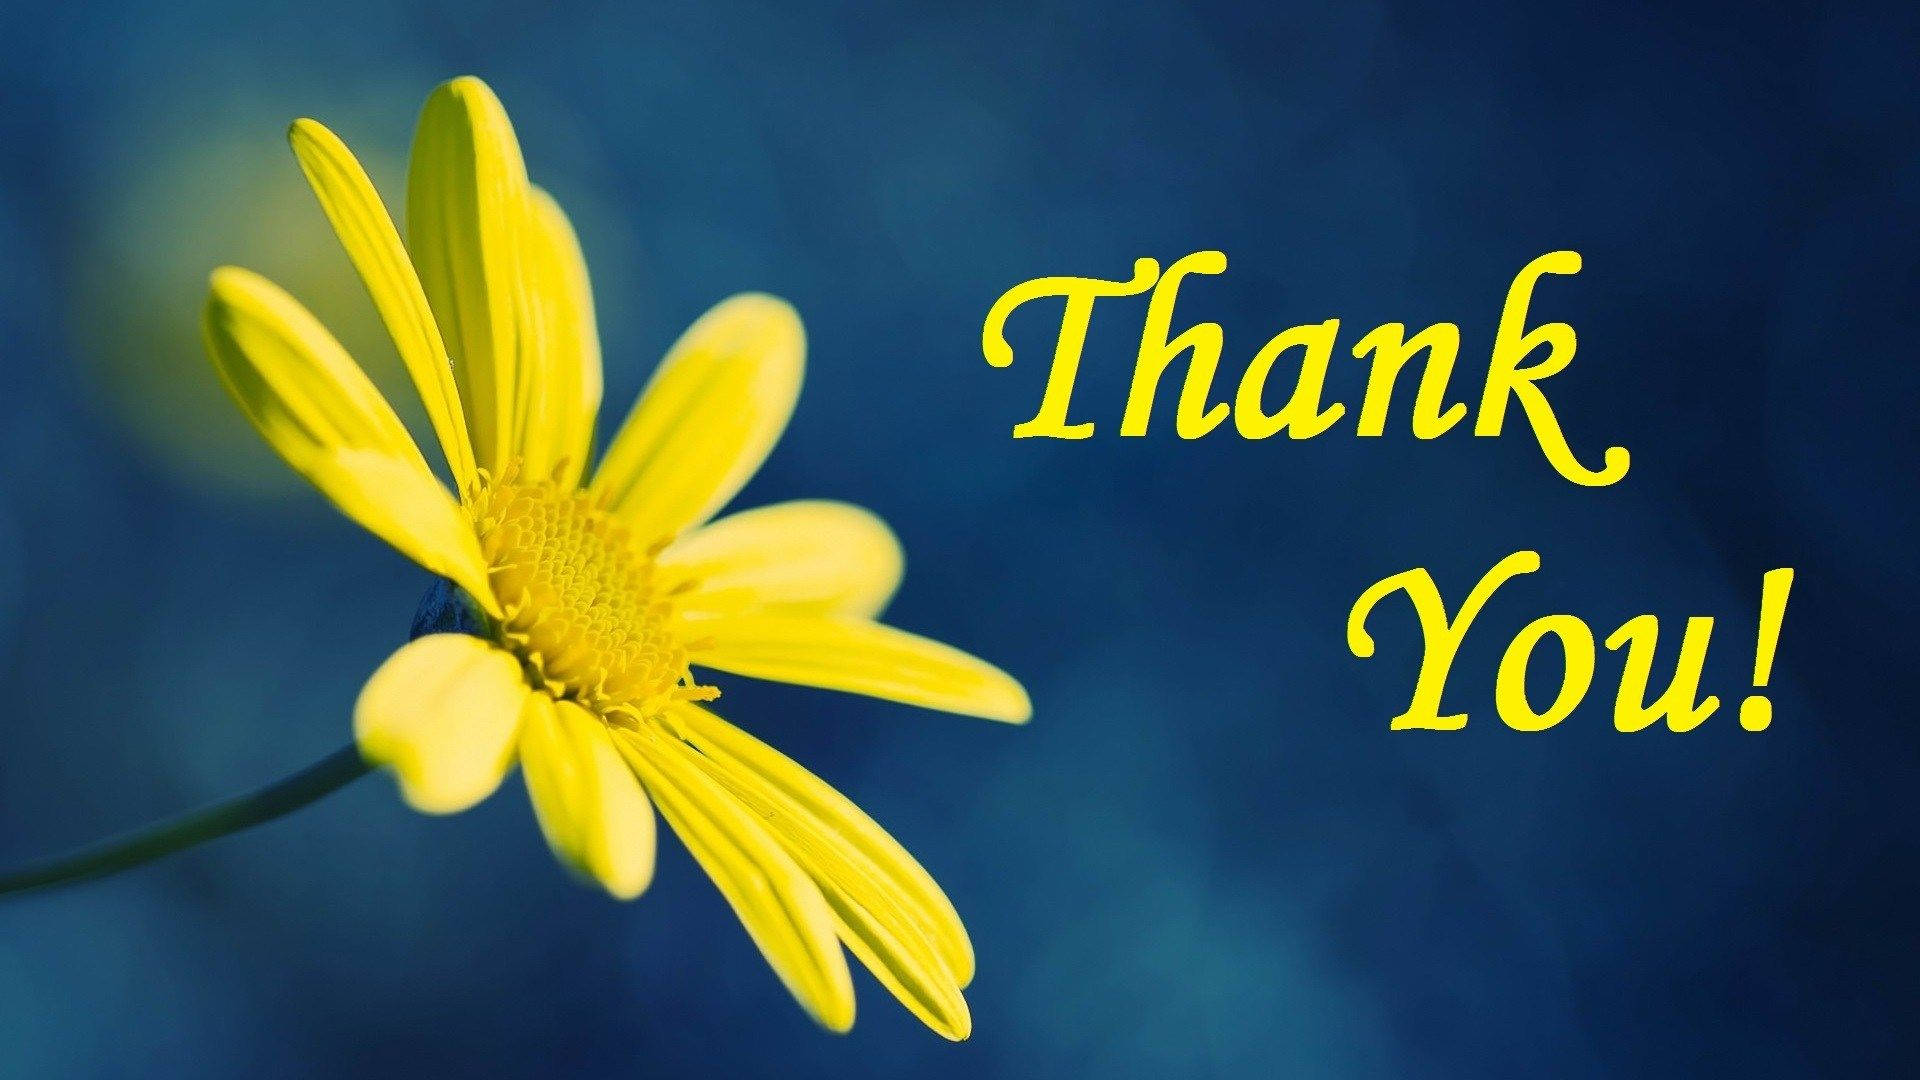 Saying Thanks For Watching With Yellow Daisy